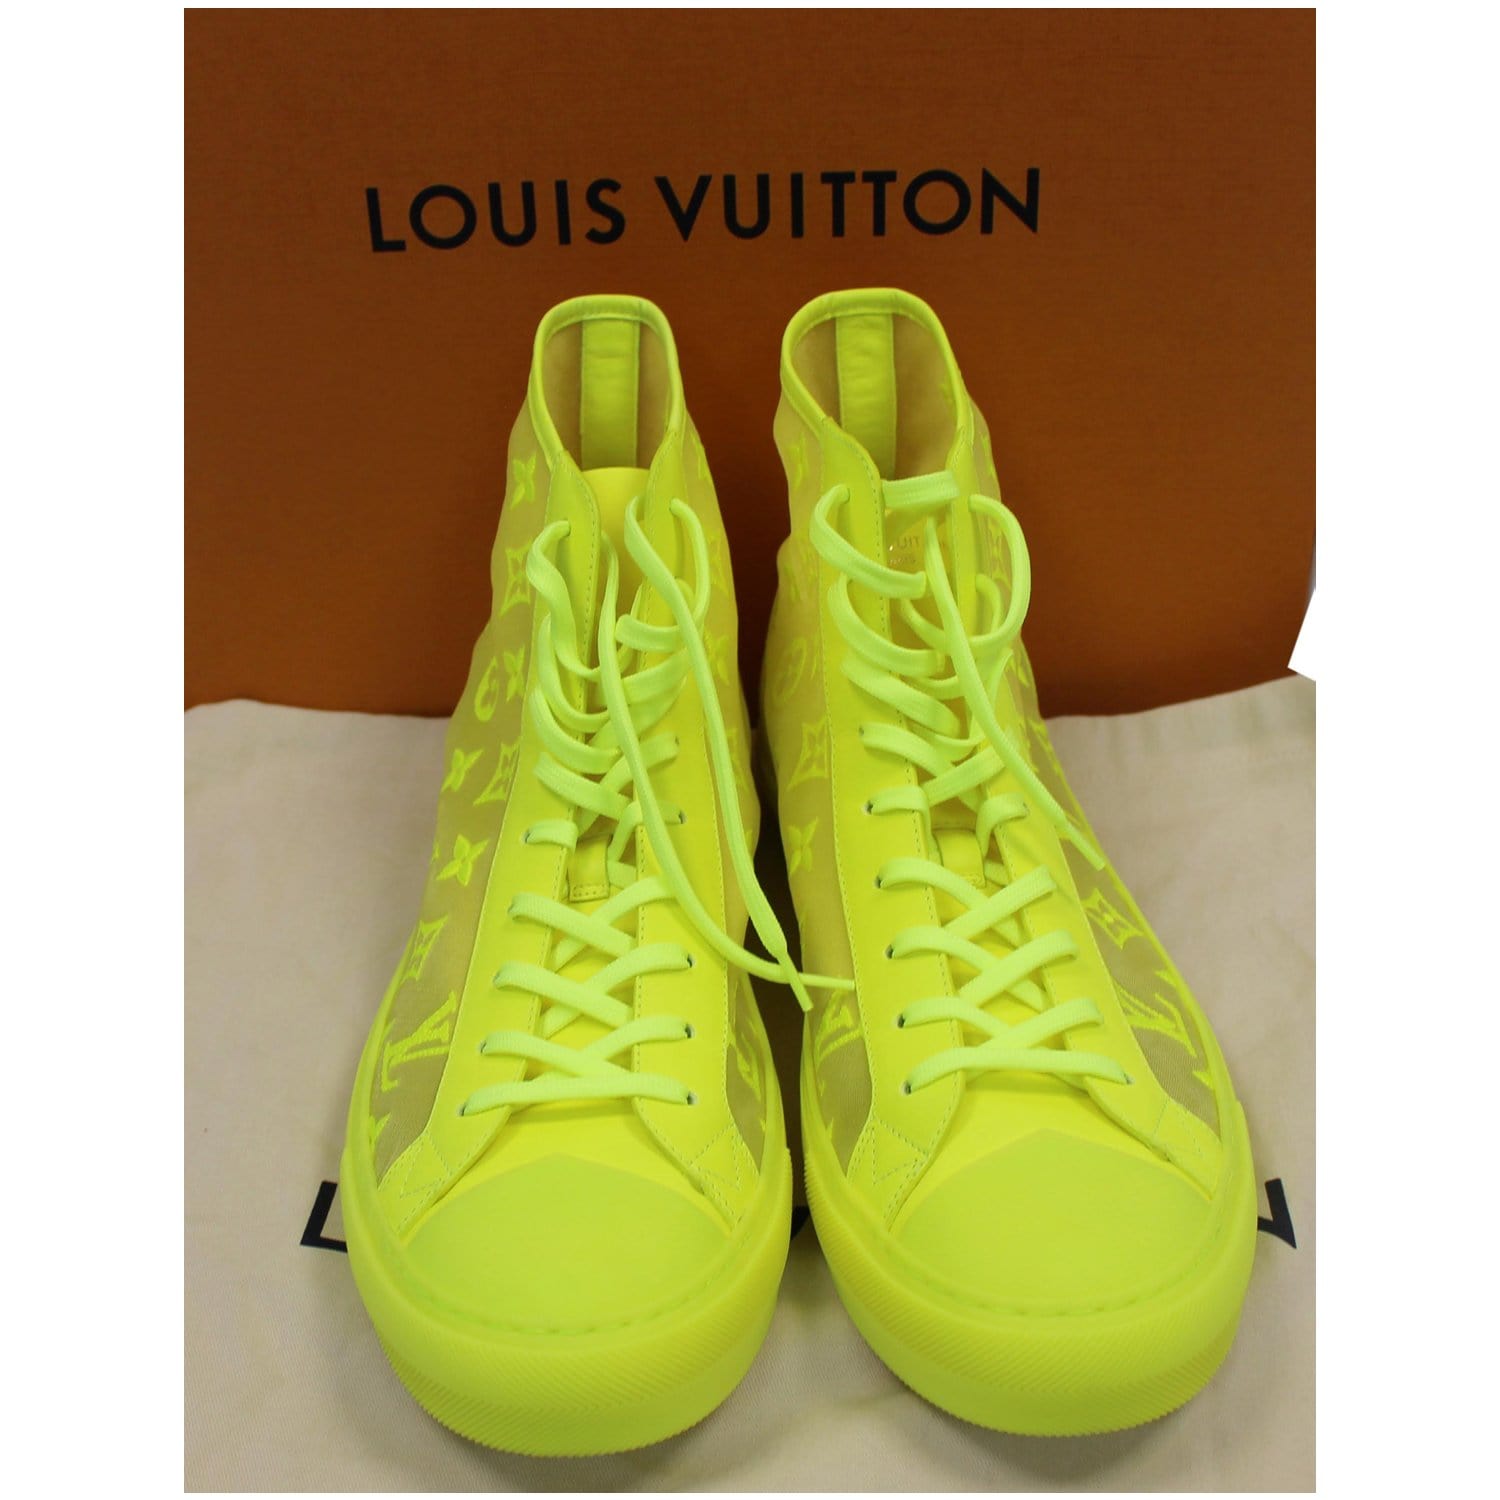 Pin by catie 🫧 on S T Y L E  Louis vuitton high tops, Louis vuitton shoes  sneakers, Louis vuitton shoes